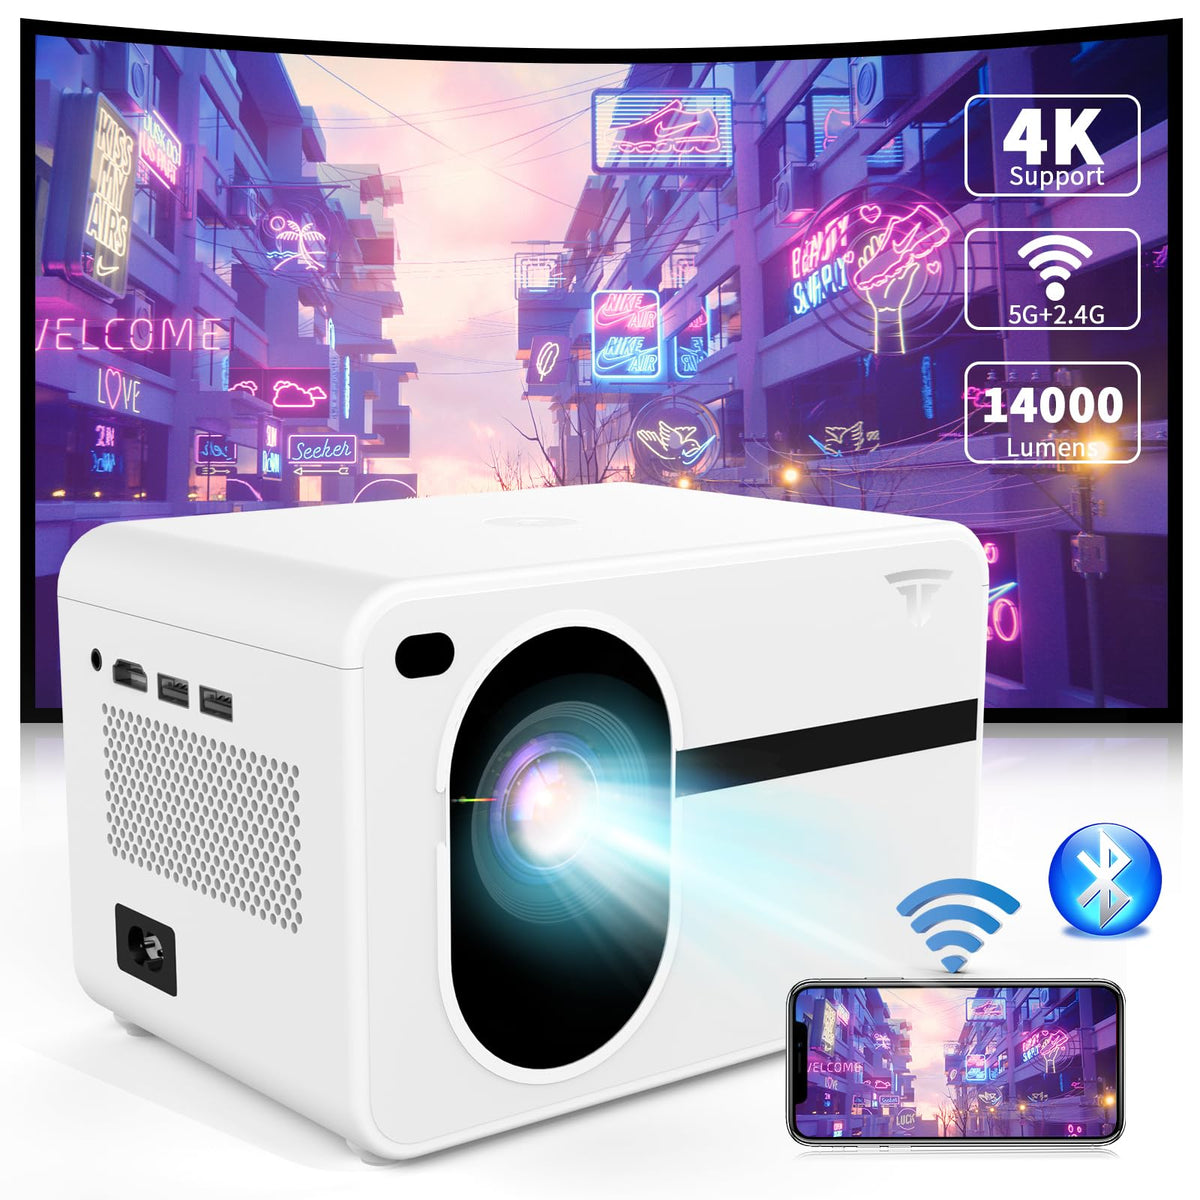 Mini Projector with Wifi and Bluetooth Native 1080P fhd, 14000L ZDK Video Movie Portable Outdoor Wifi Projector Home Theater, Proyector Compatible with iOS/Android Phone/Laptop/PC/TV Stick/HDMI/USB/AV